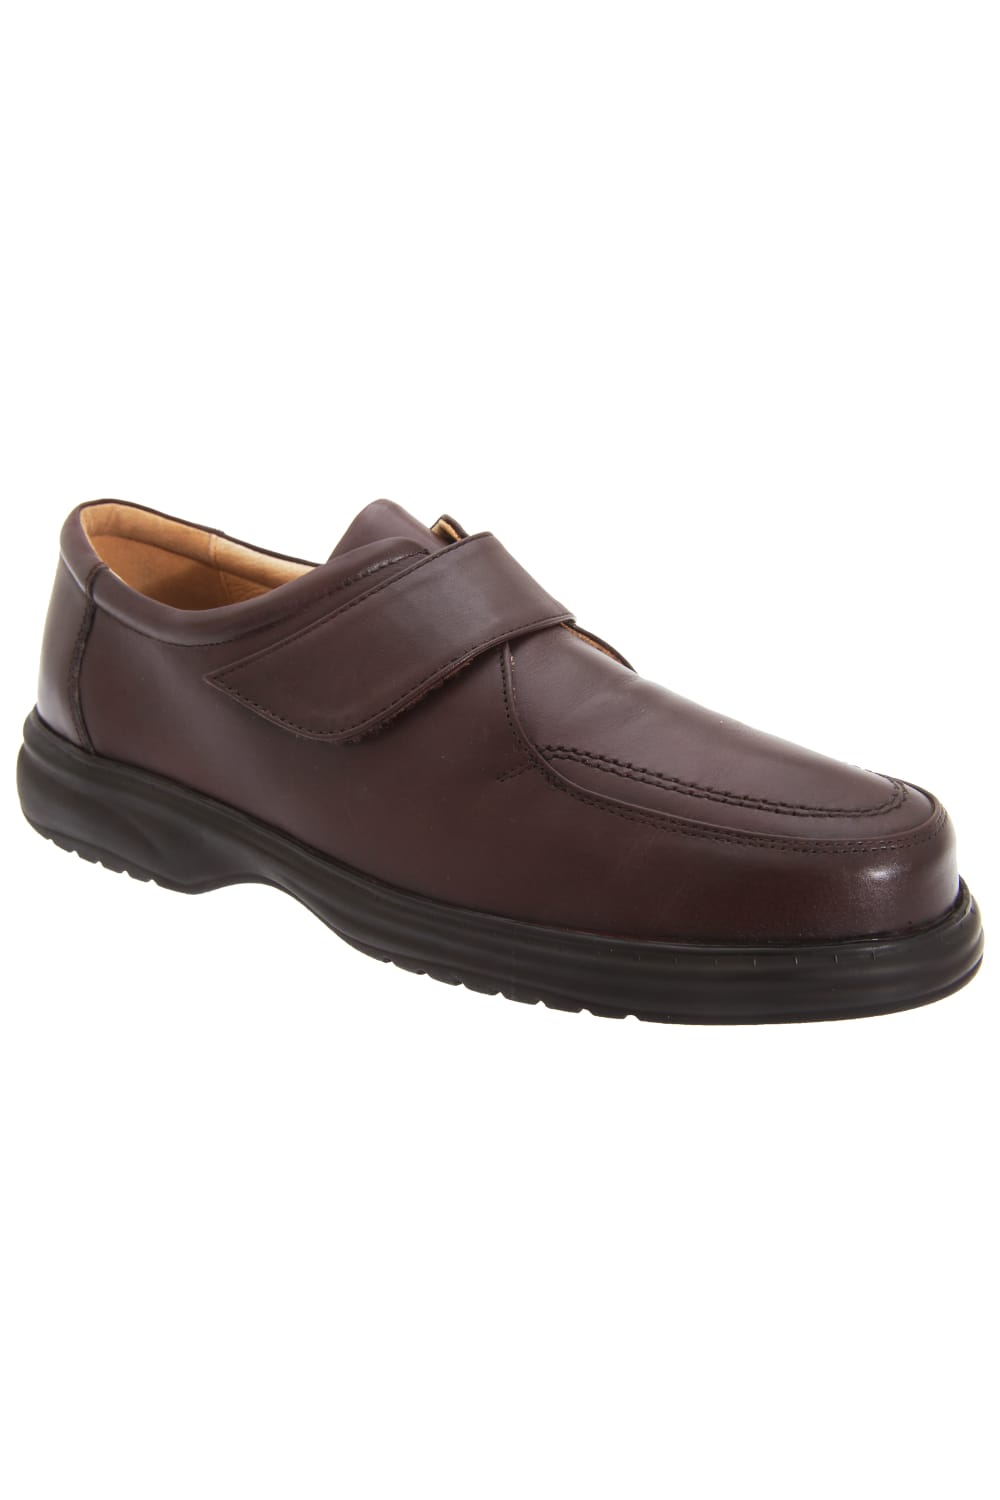 Mens Superlite Wide Fit Touch Fastening Leather Shoes (Brown)